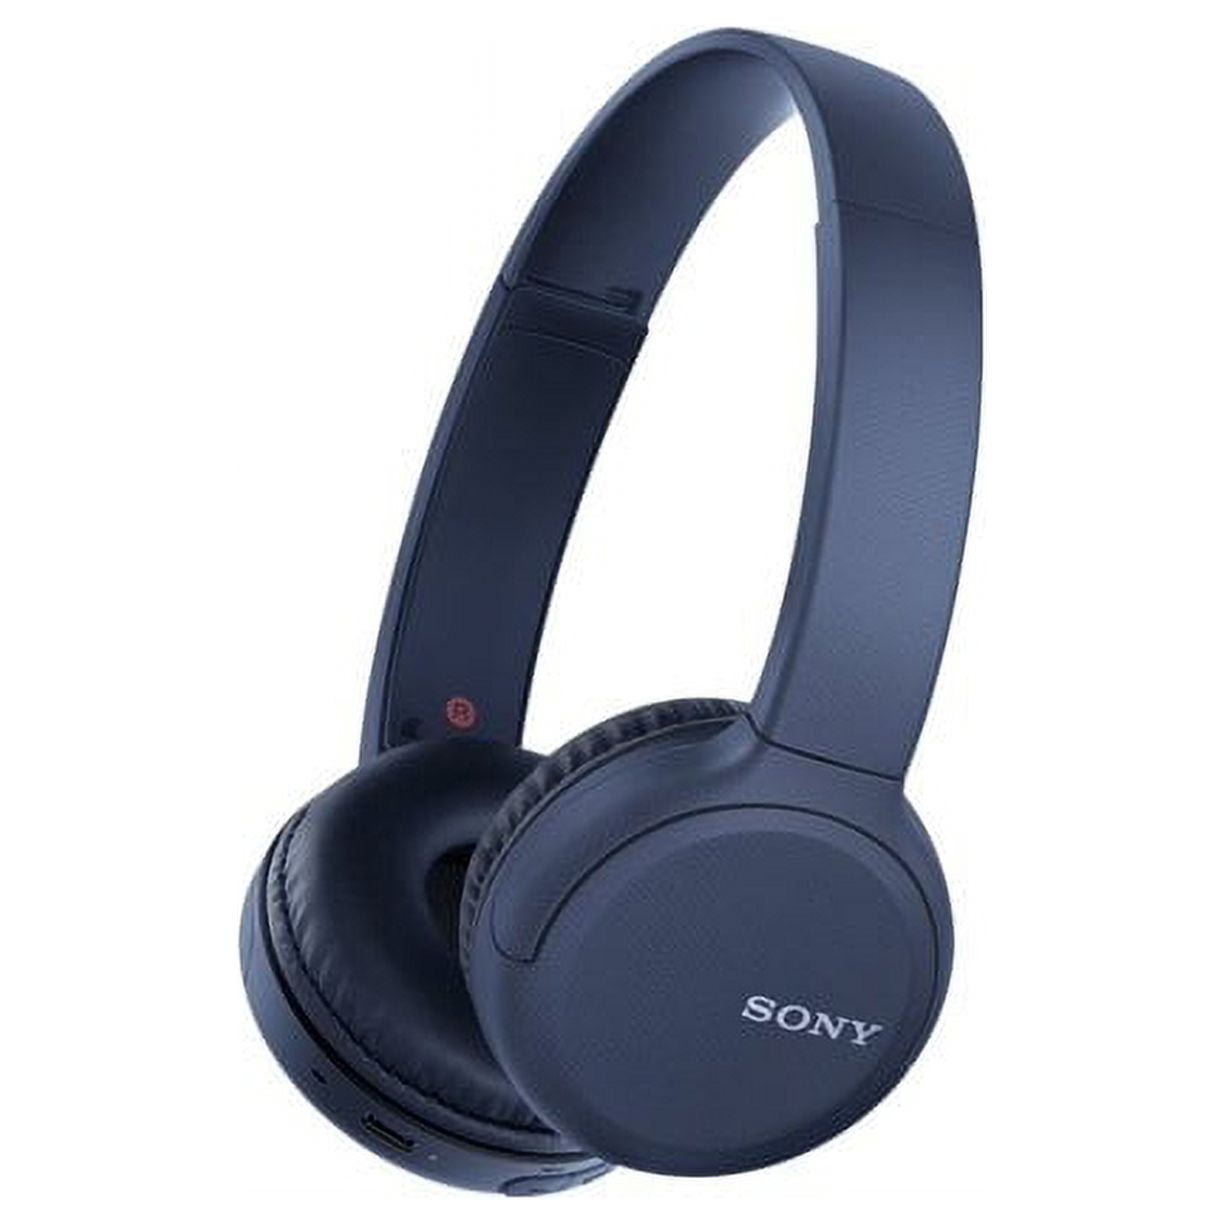 Sony WH-CH520 review - STEREO GUIDE